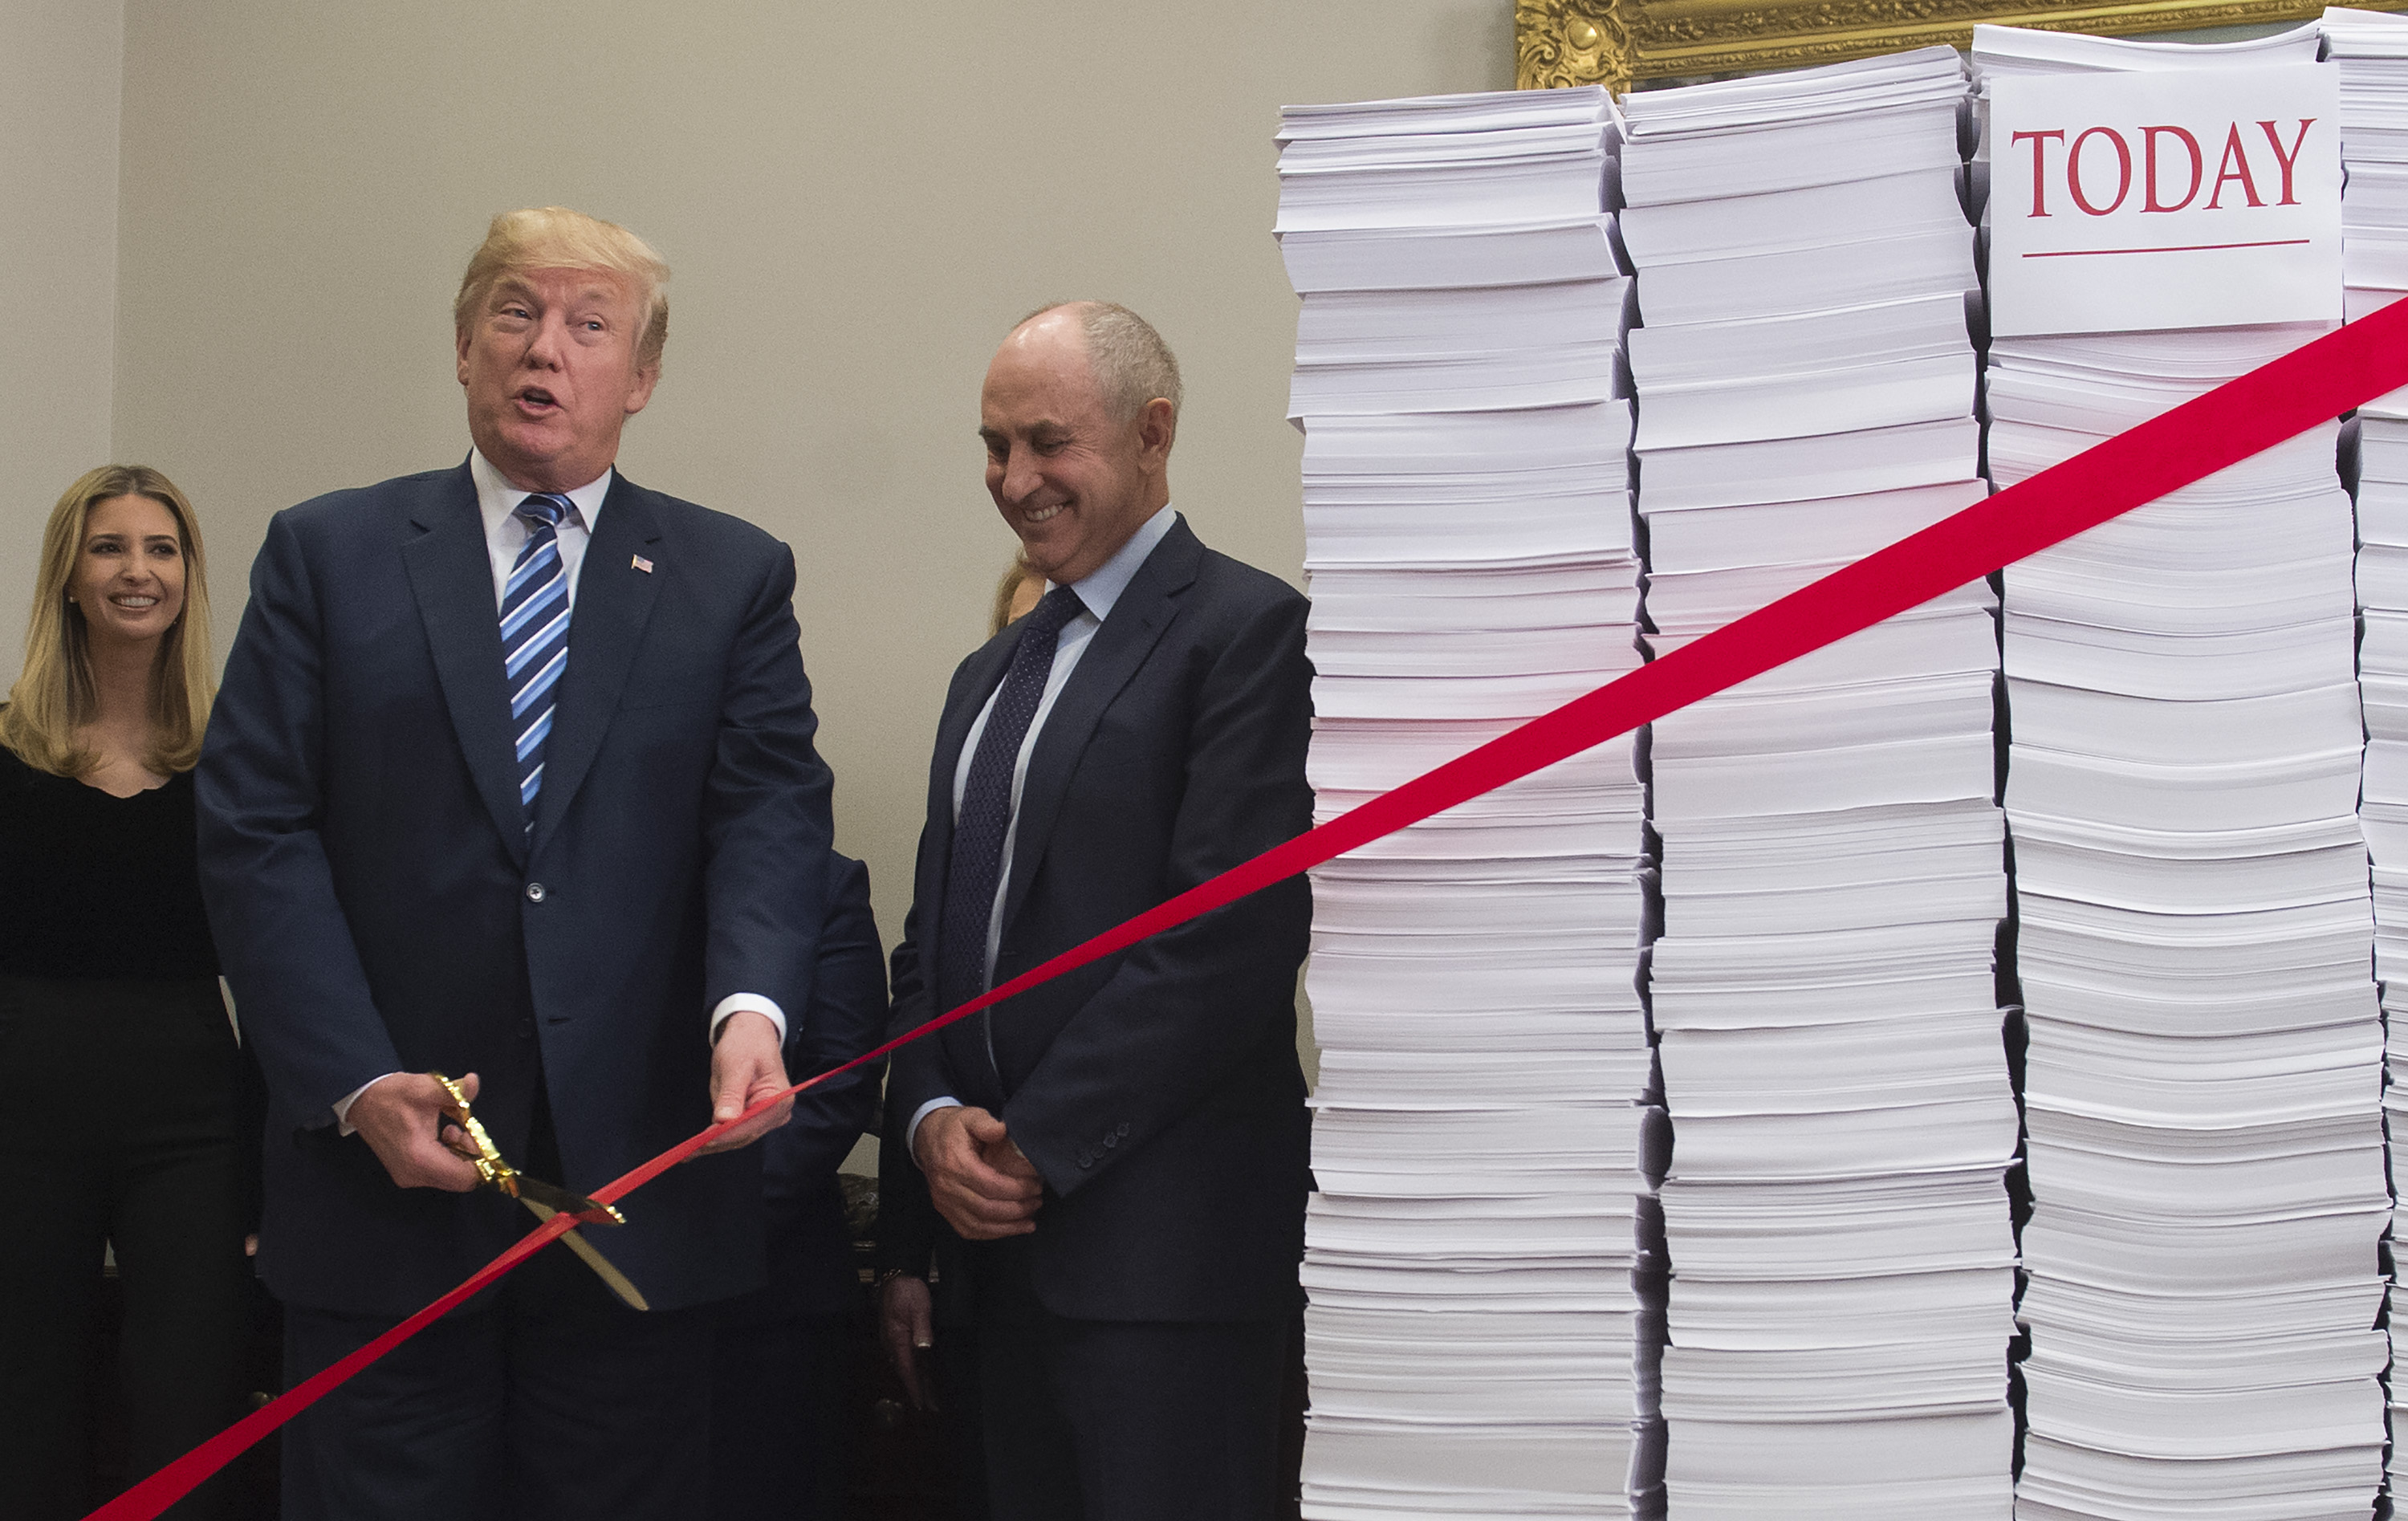 Donald Trump cutting red tape in front of tax documents